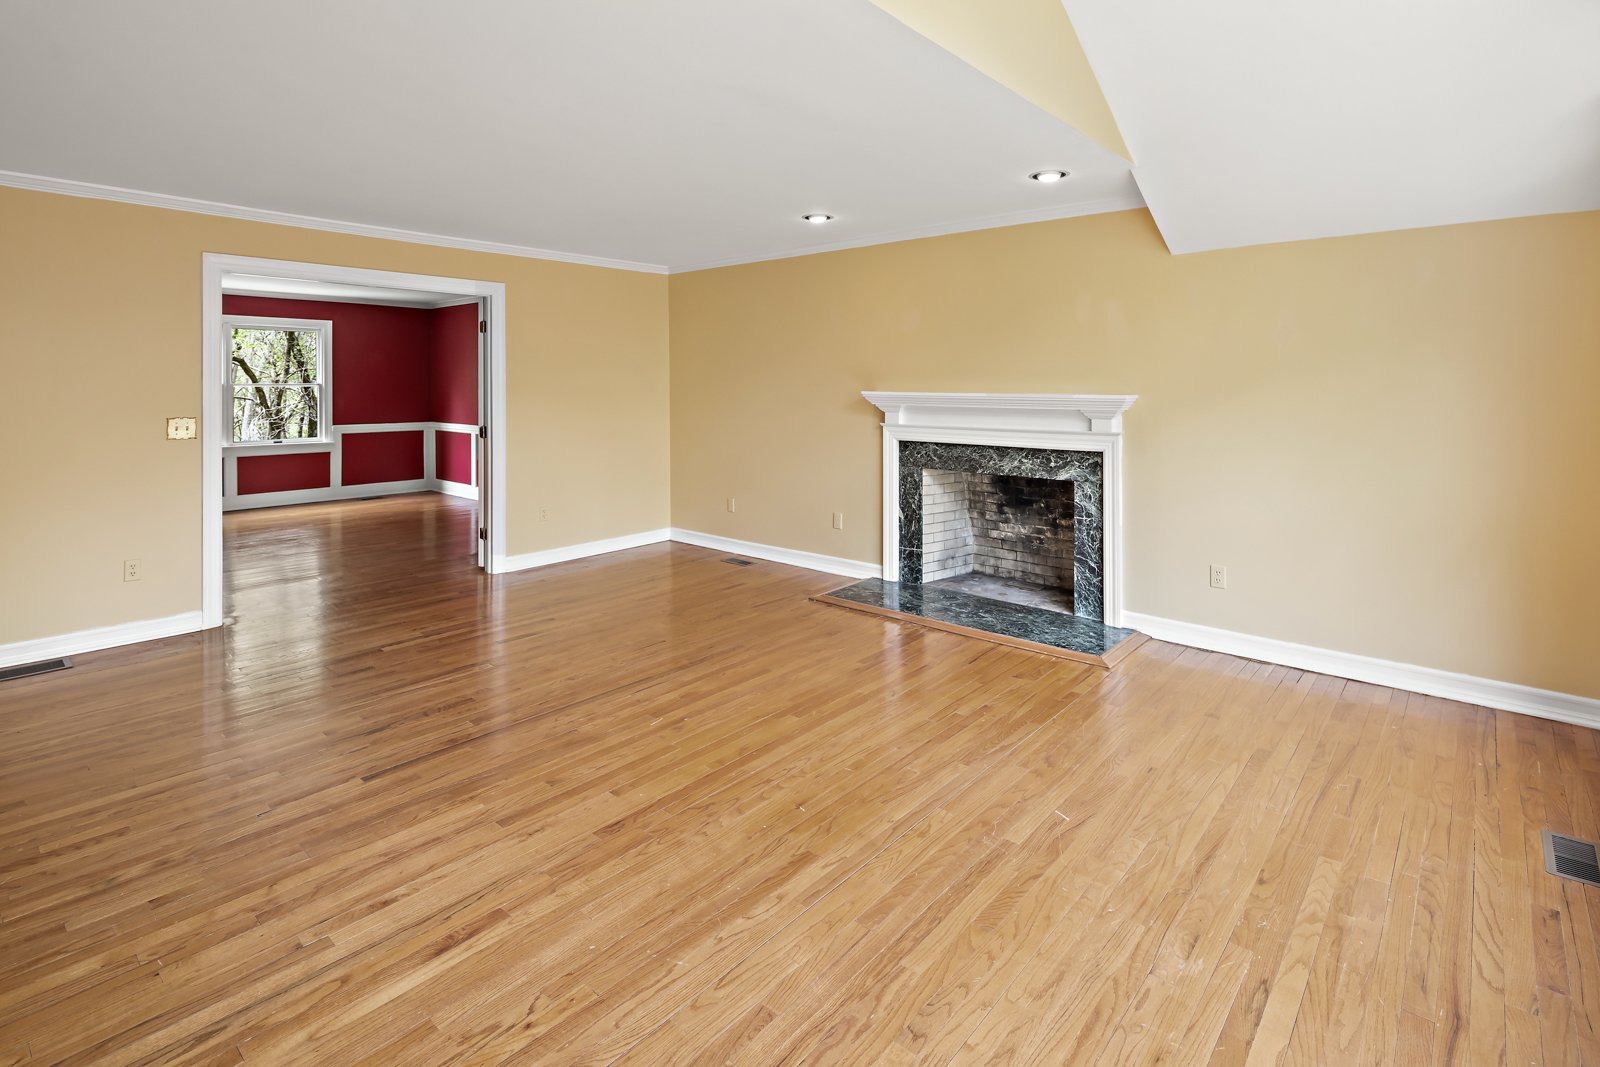 Living room to dining room of 14 Echo Hill Road Weston CT-10.jpg